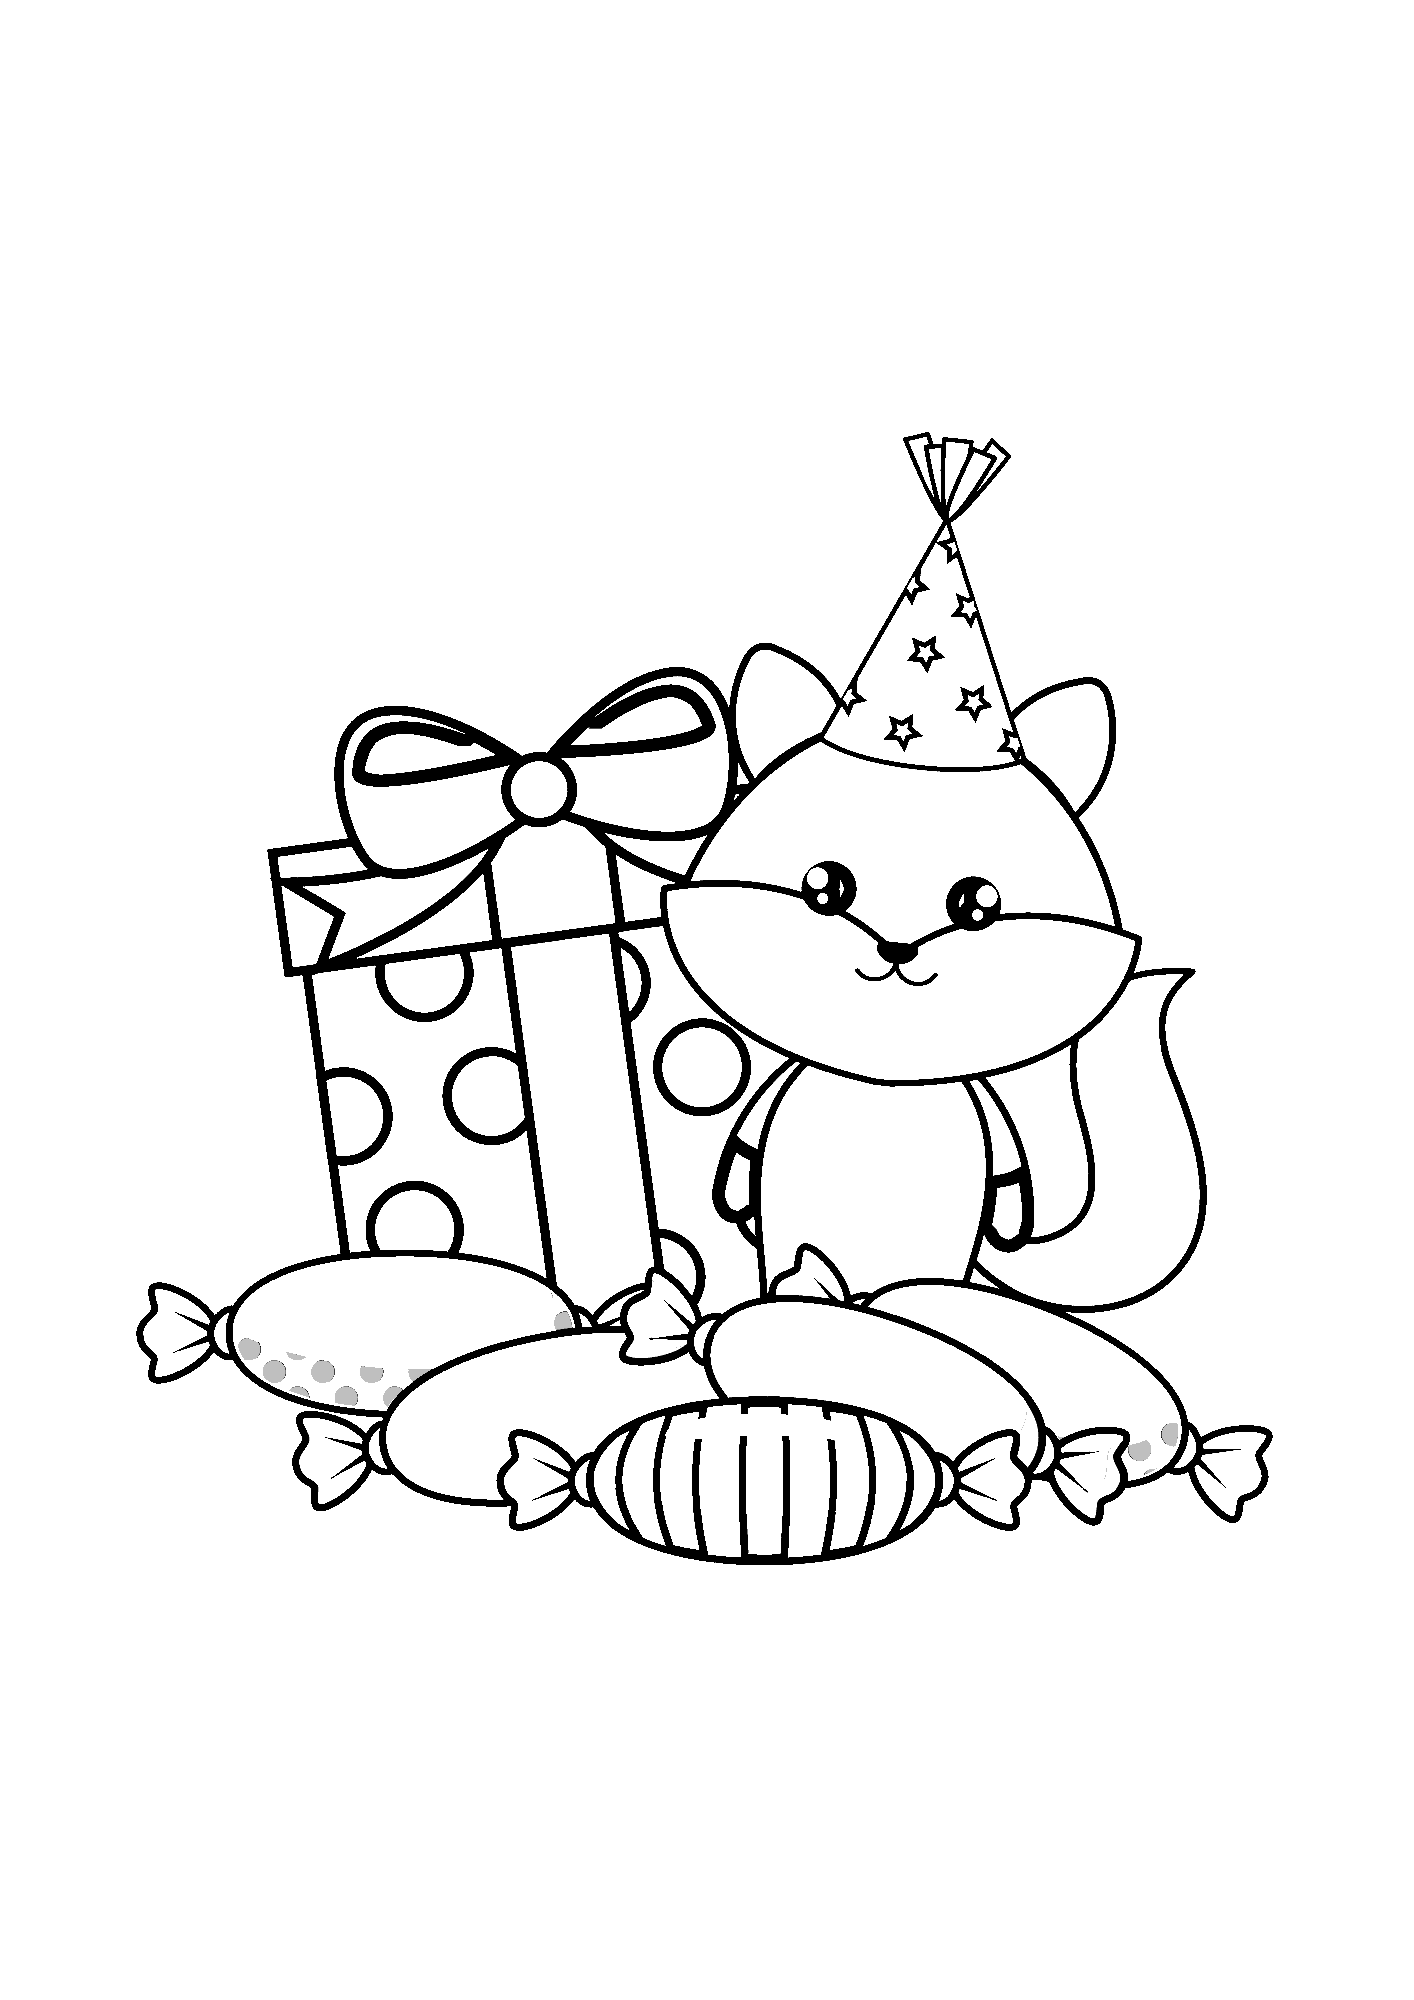 Happy Birthday Gifts With Cute Fox